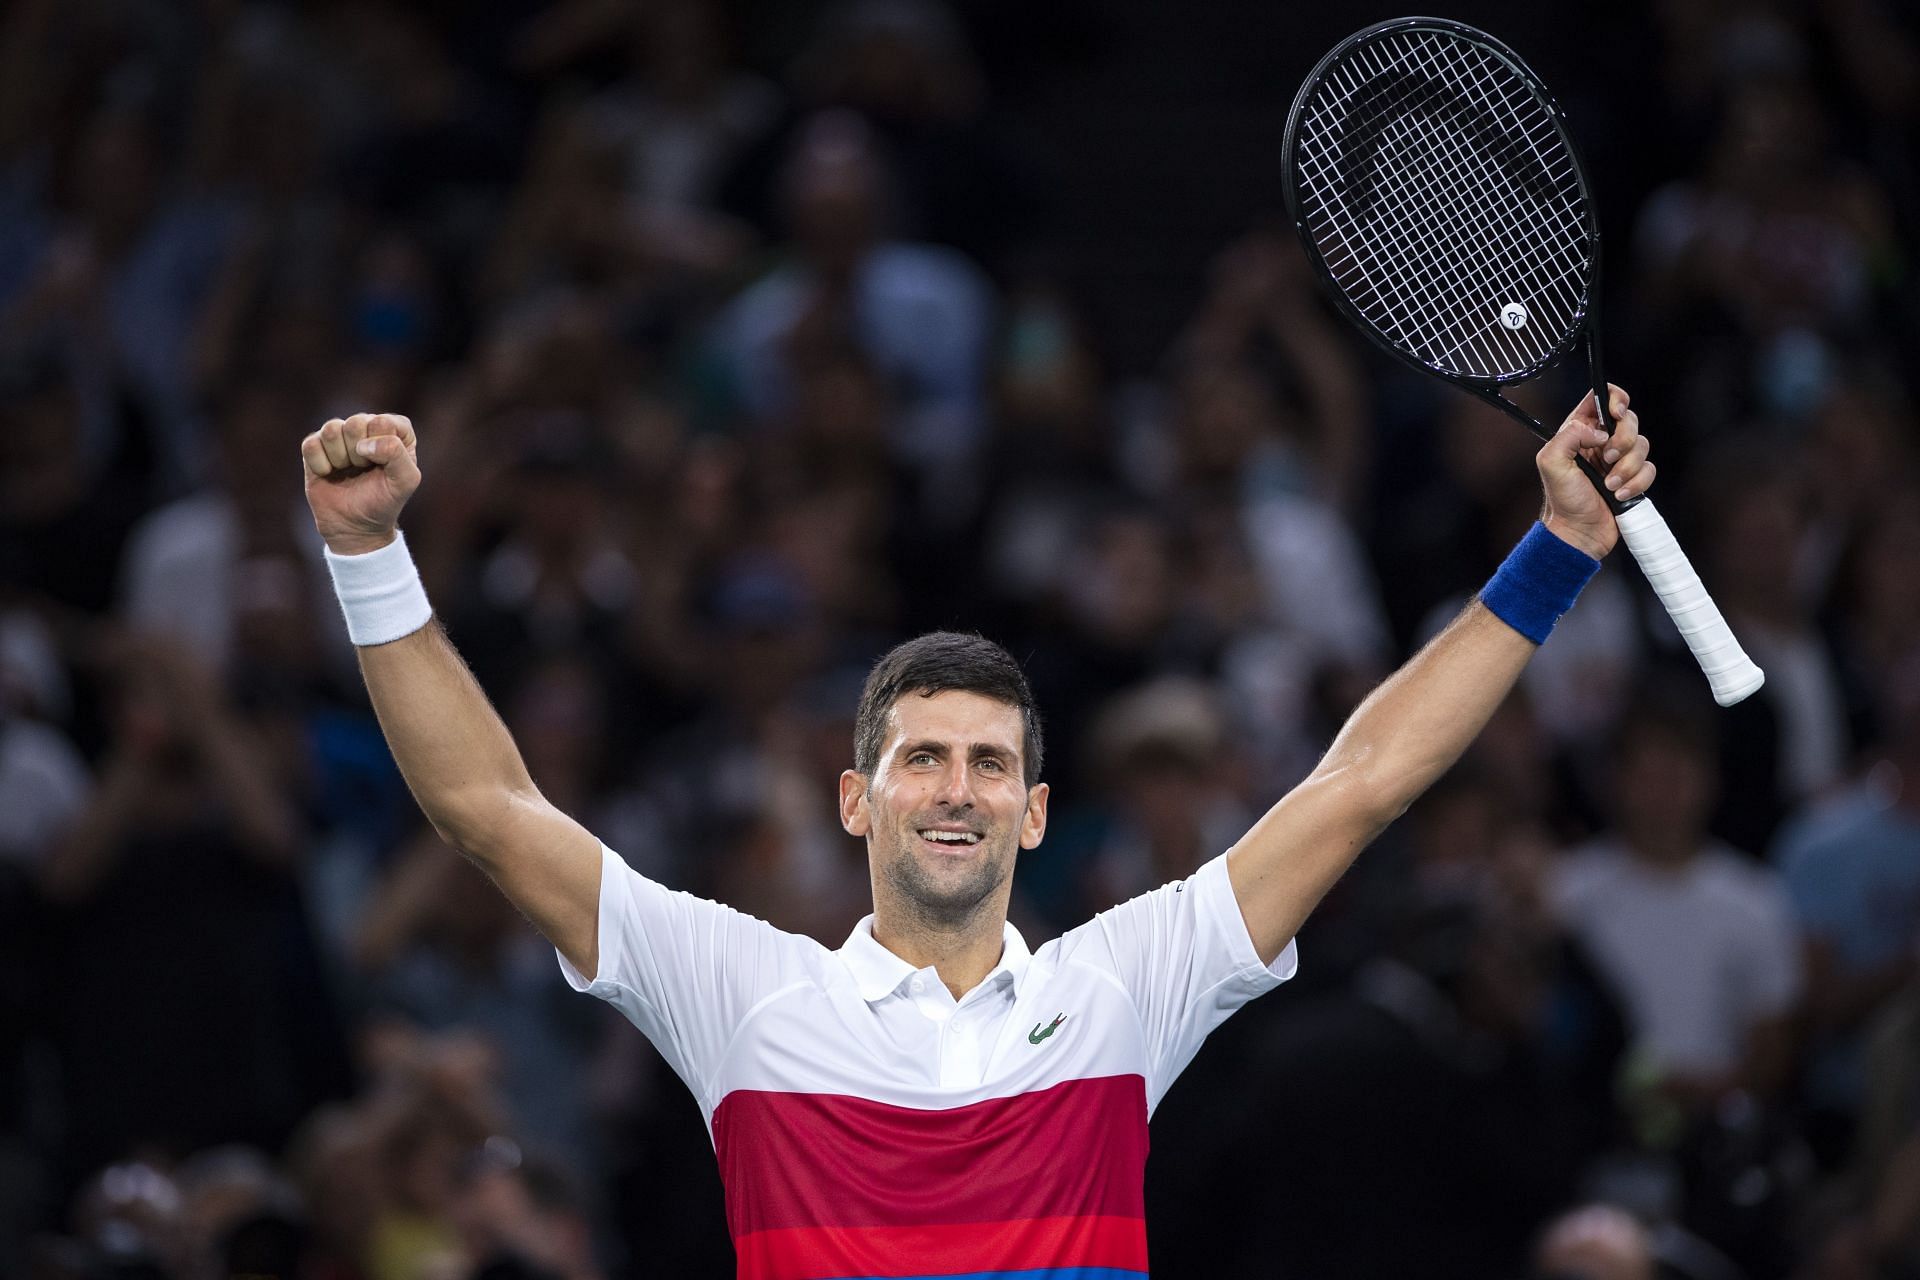 The World No. 1 at the 2021 Rolex Paris Masters